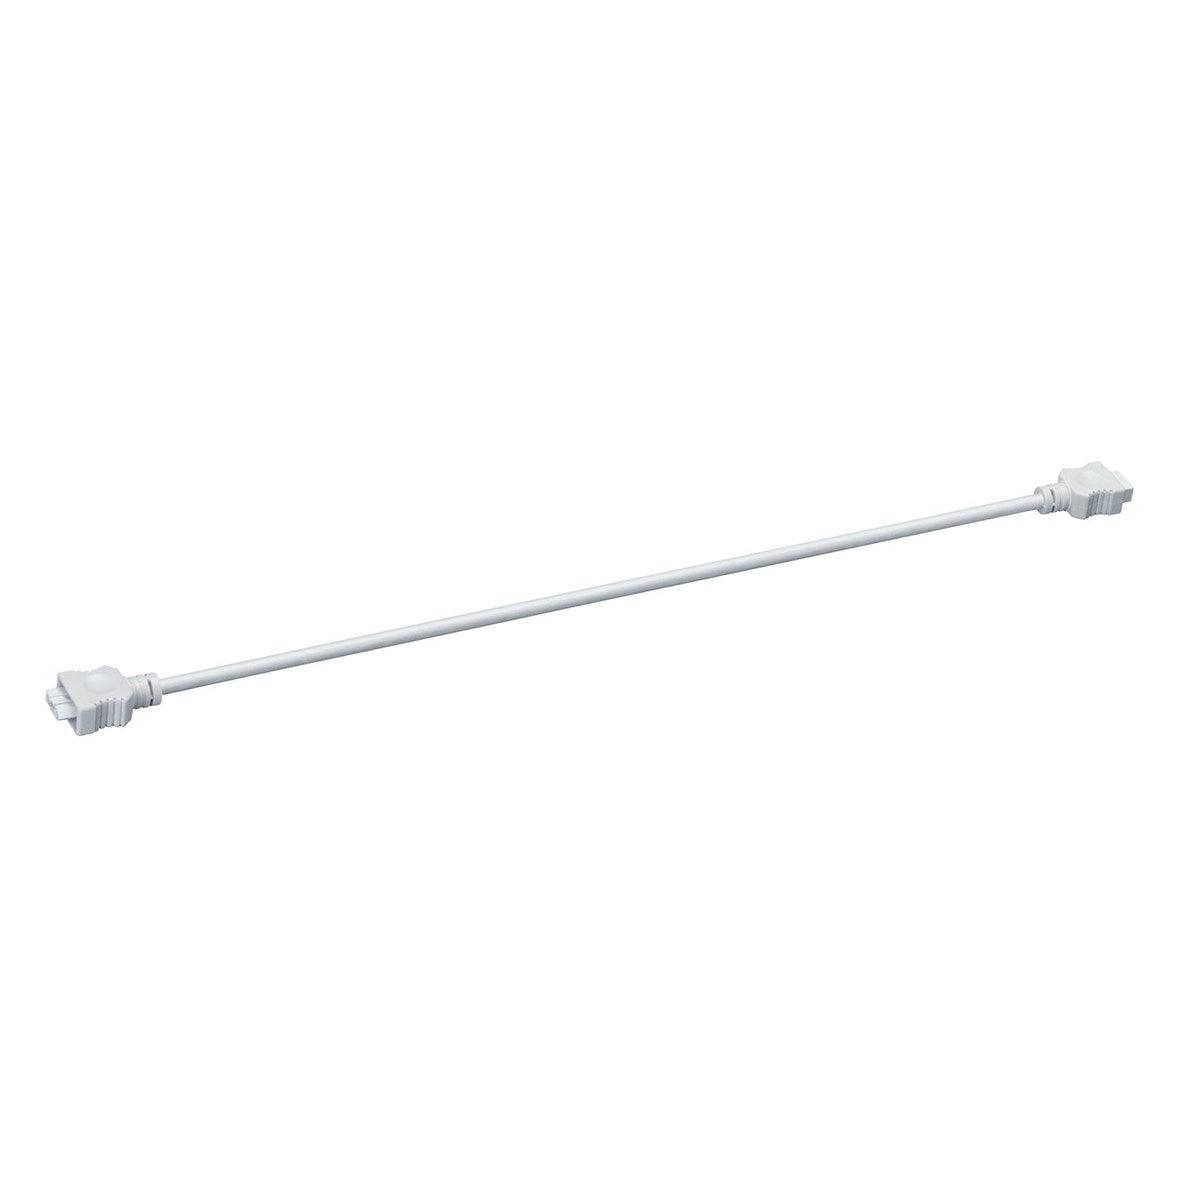 21in. Interconnect Cable for 6U Under cabinet lights, White